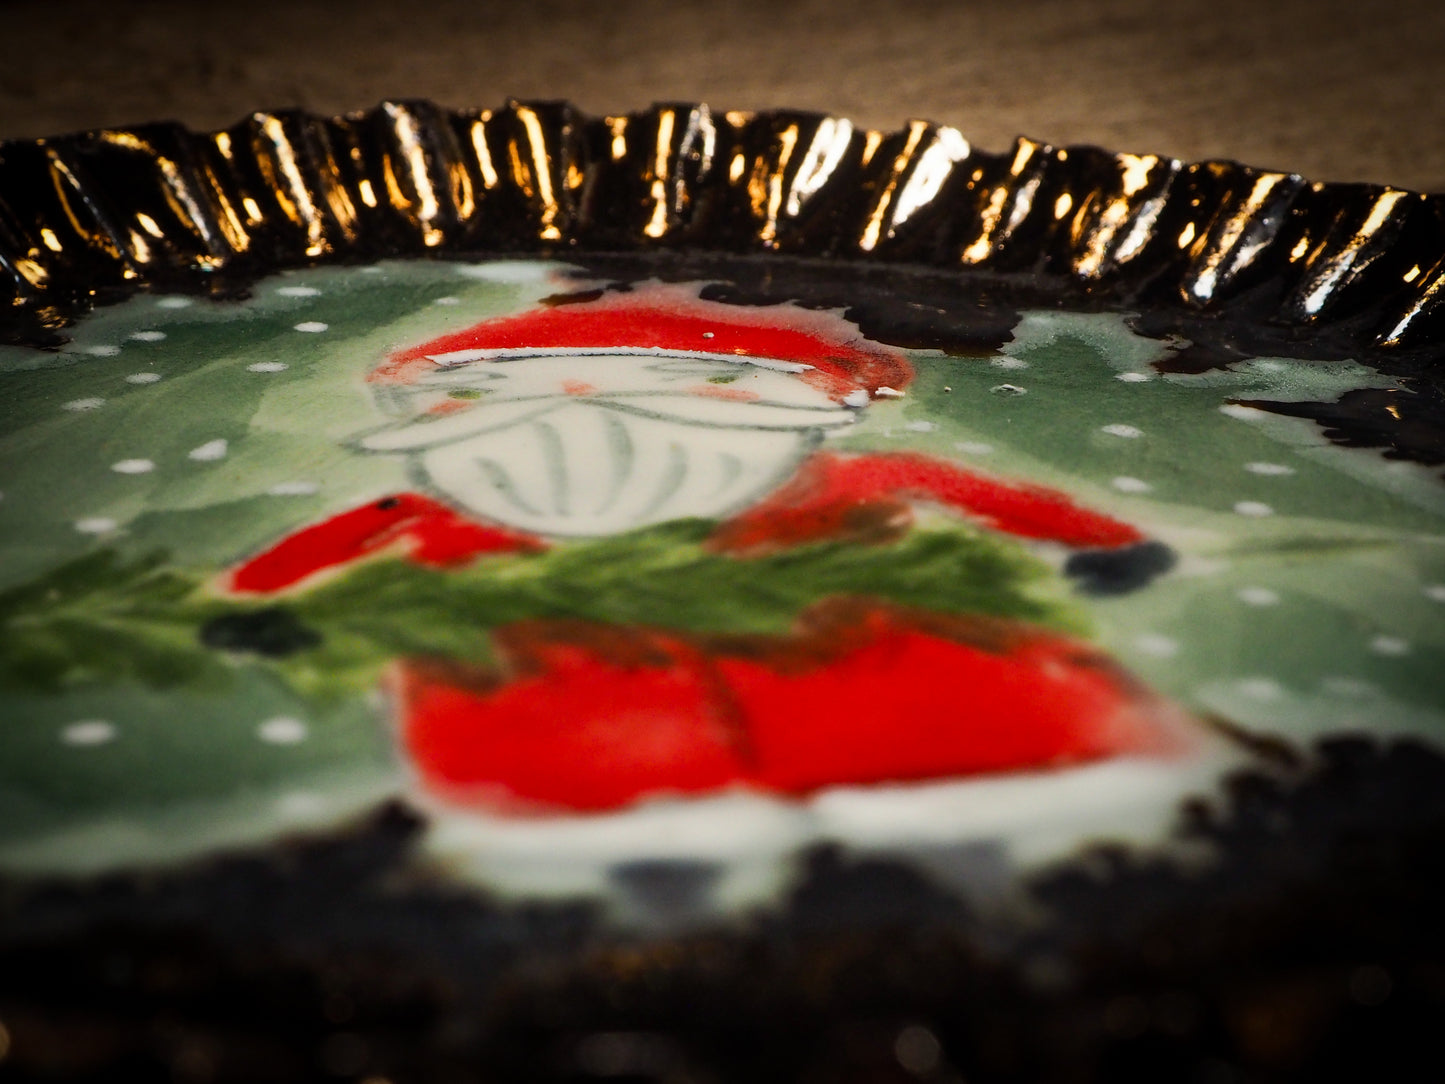 HOLIDAY CAKE PLATE #17